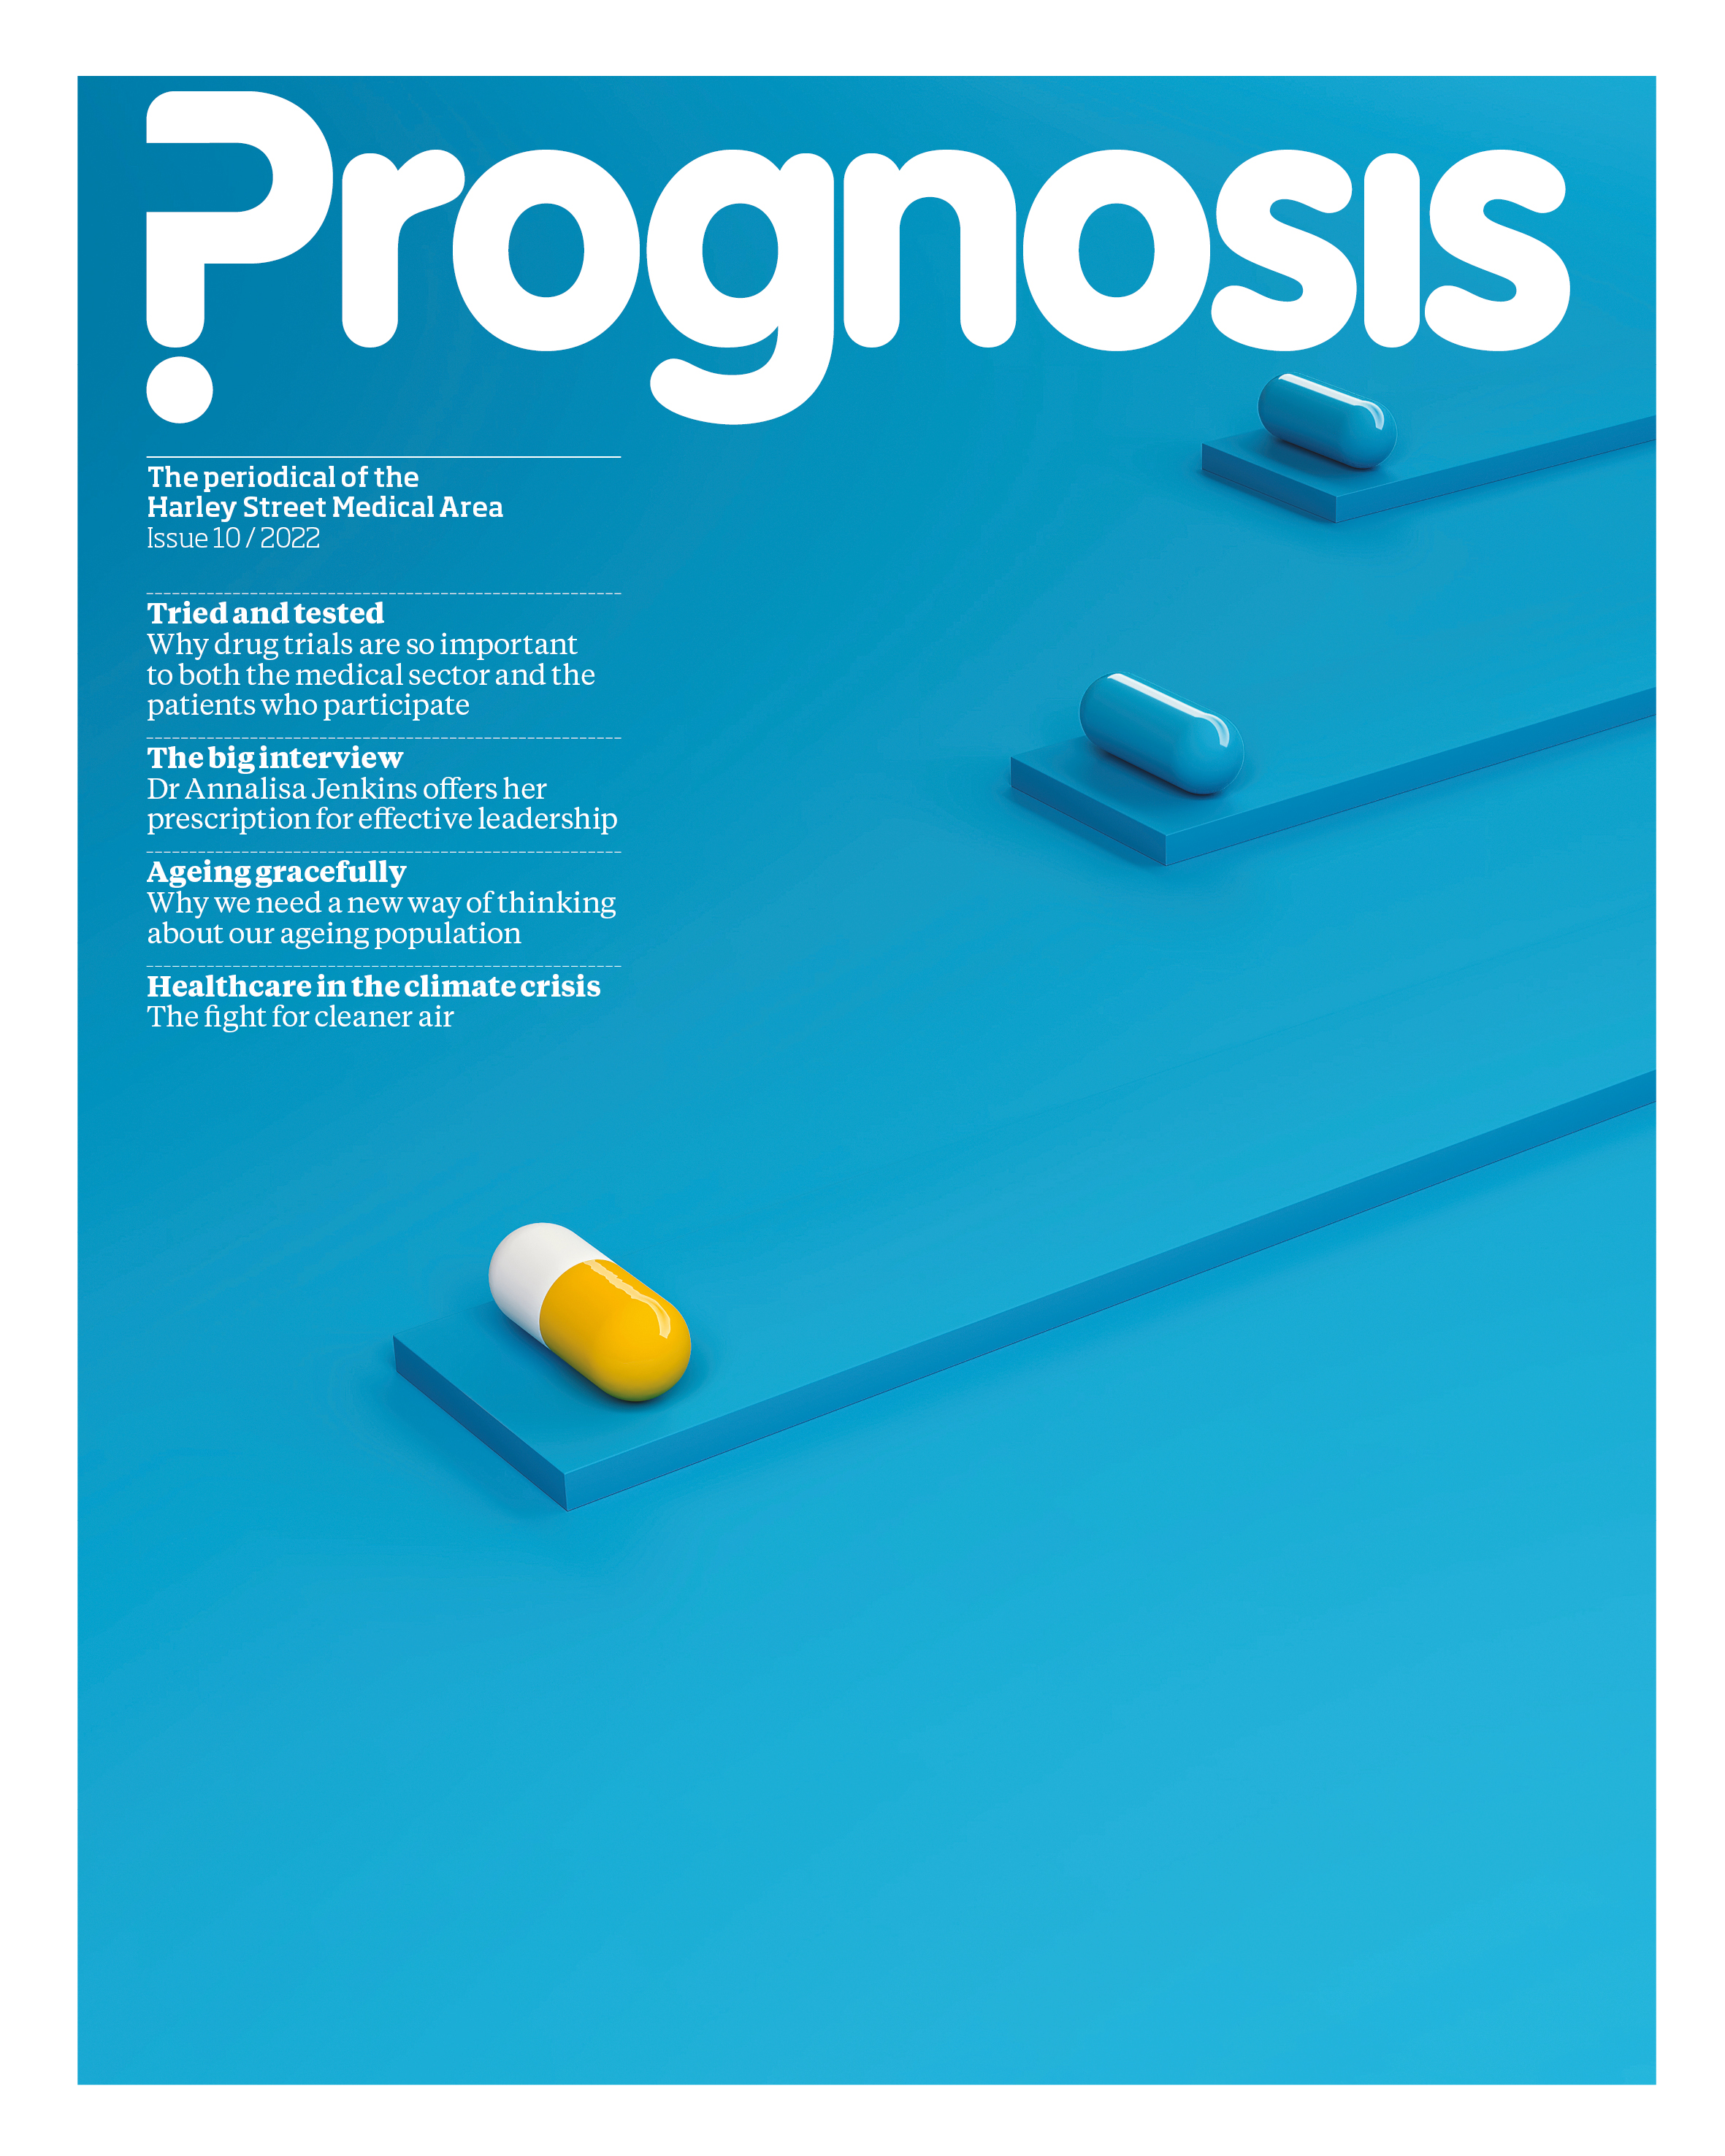 The front cover of Prognosis magazine. The cover is a deep blue colour and there is a small yellow and white pill. The contents of the magazine is listed in the top left corner.